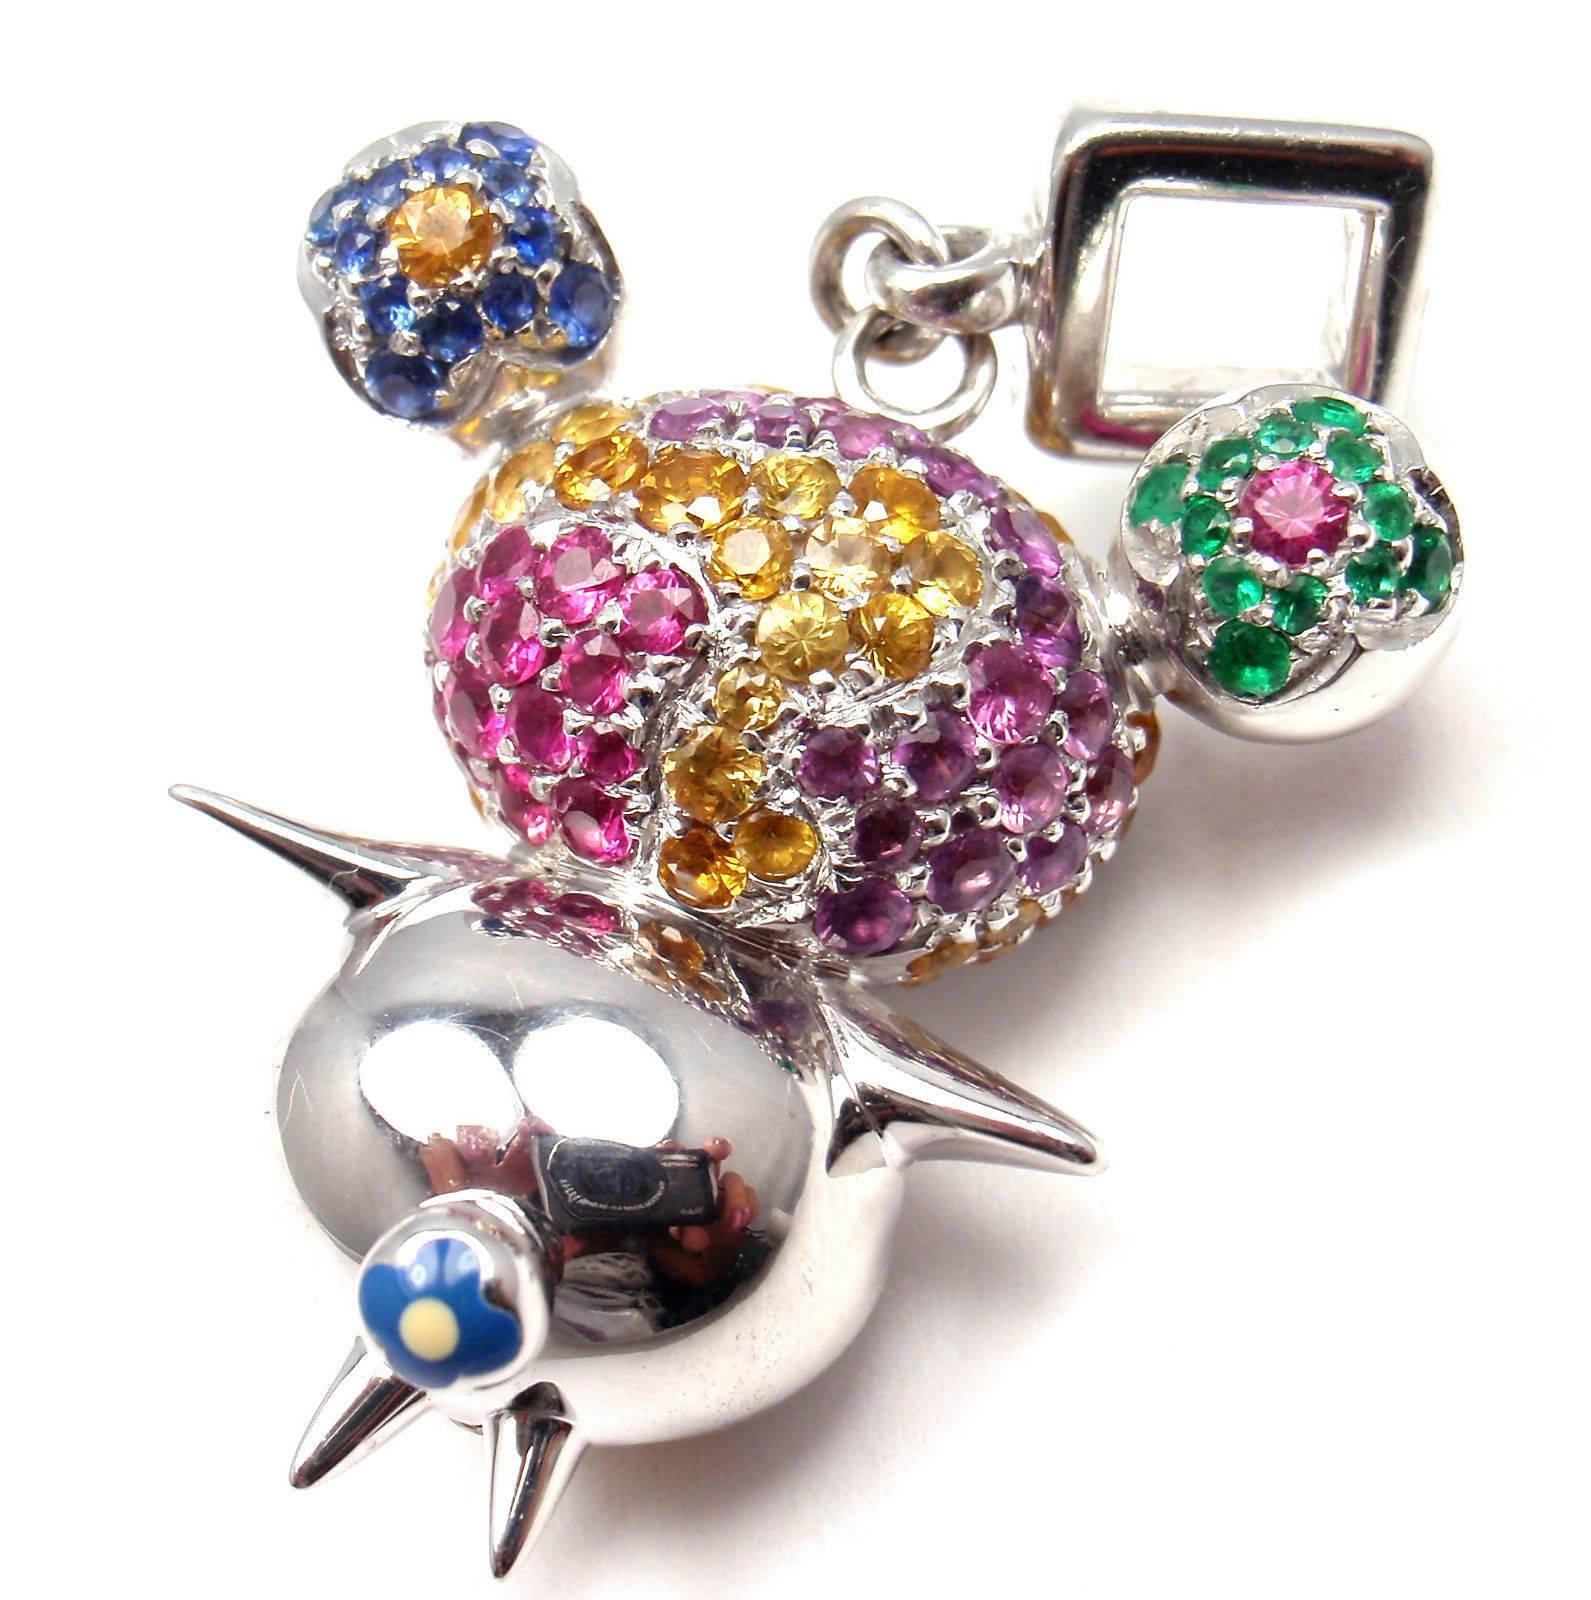 18k White Gold Diamond Color Sapphire Emerald Panda Pendant by Takashi Murakami for Louis Vuitton. 
A masterpiece, very limited edition Takashi Murakami for Louis Vuitton Joaillerie Panda pendant.
With 118 multi color sapphires total approx.